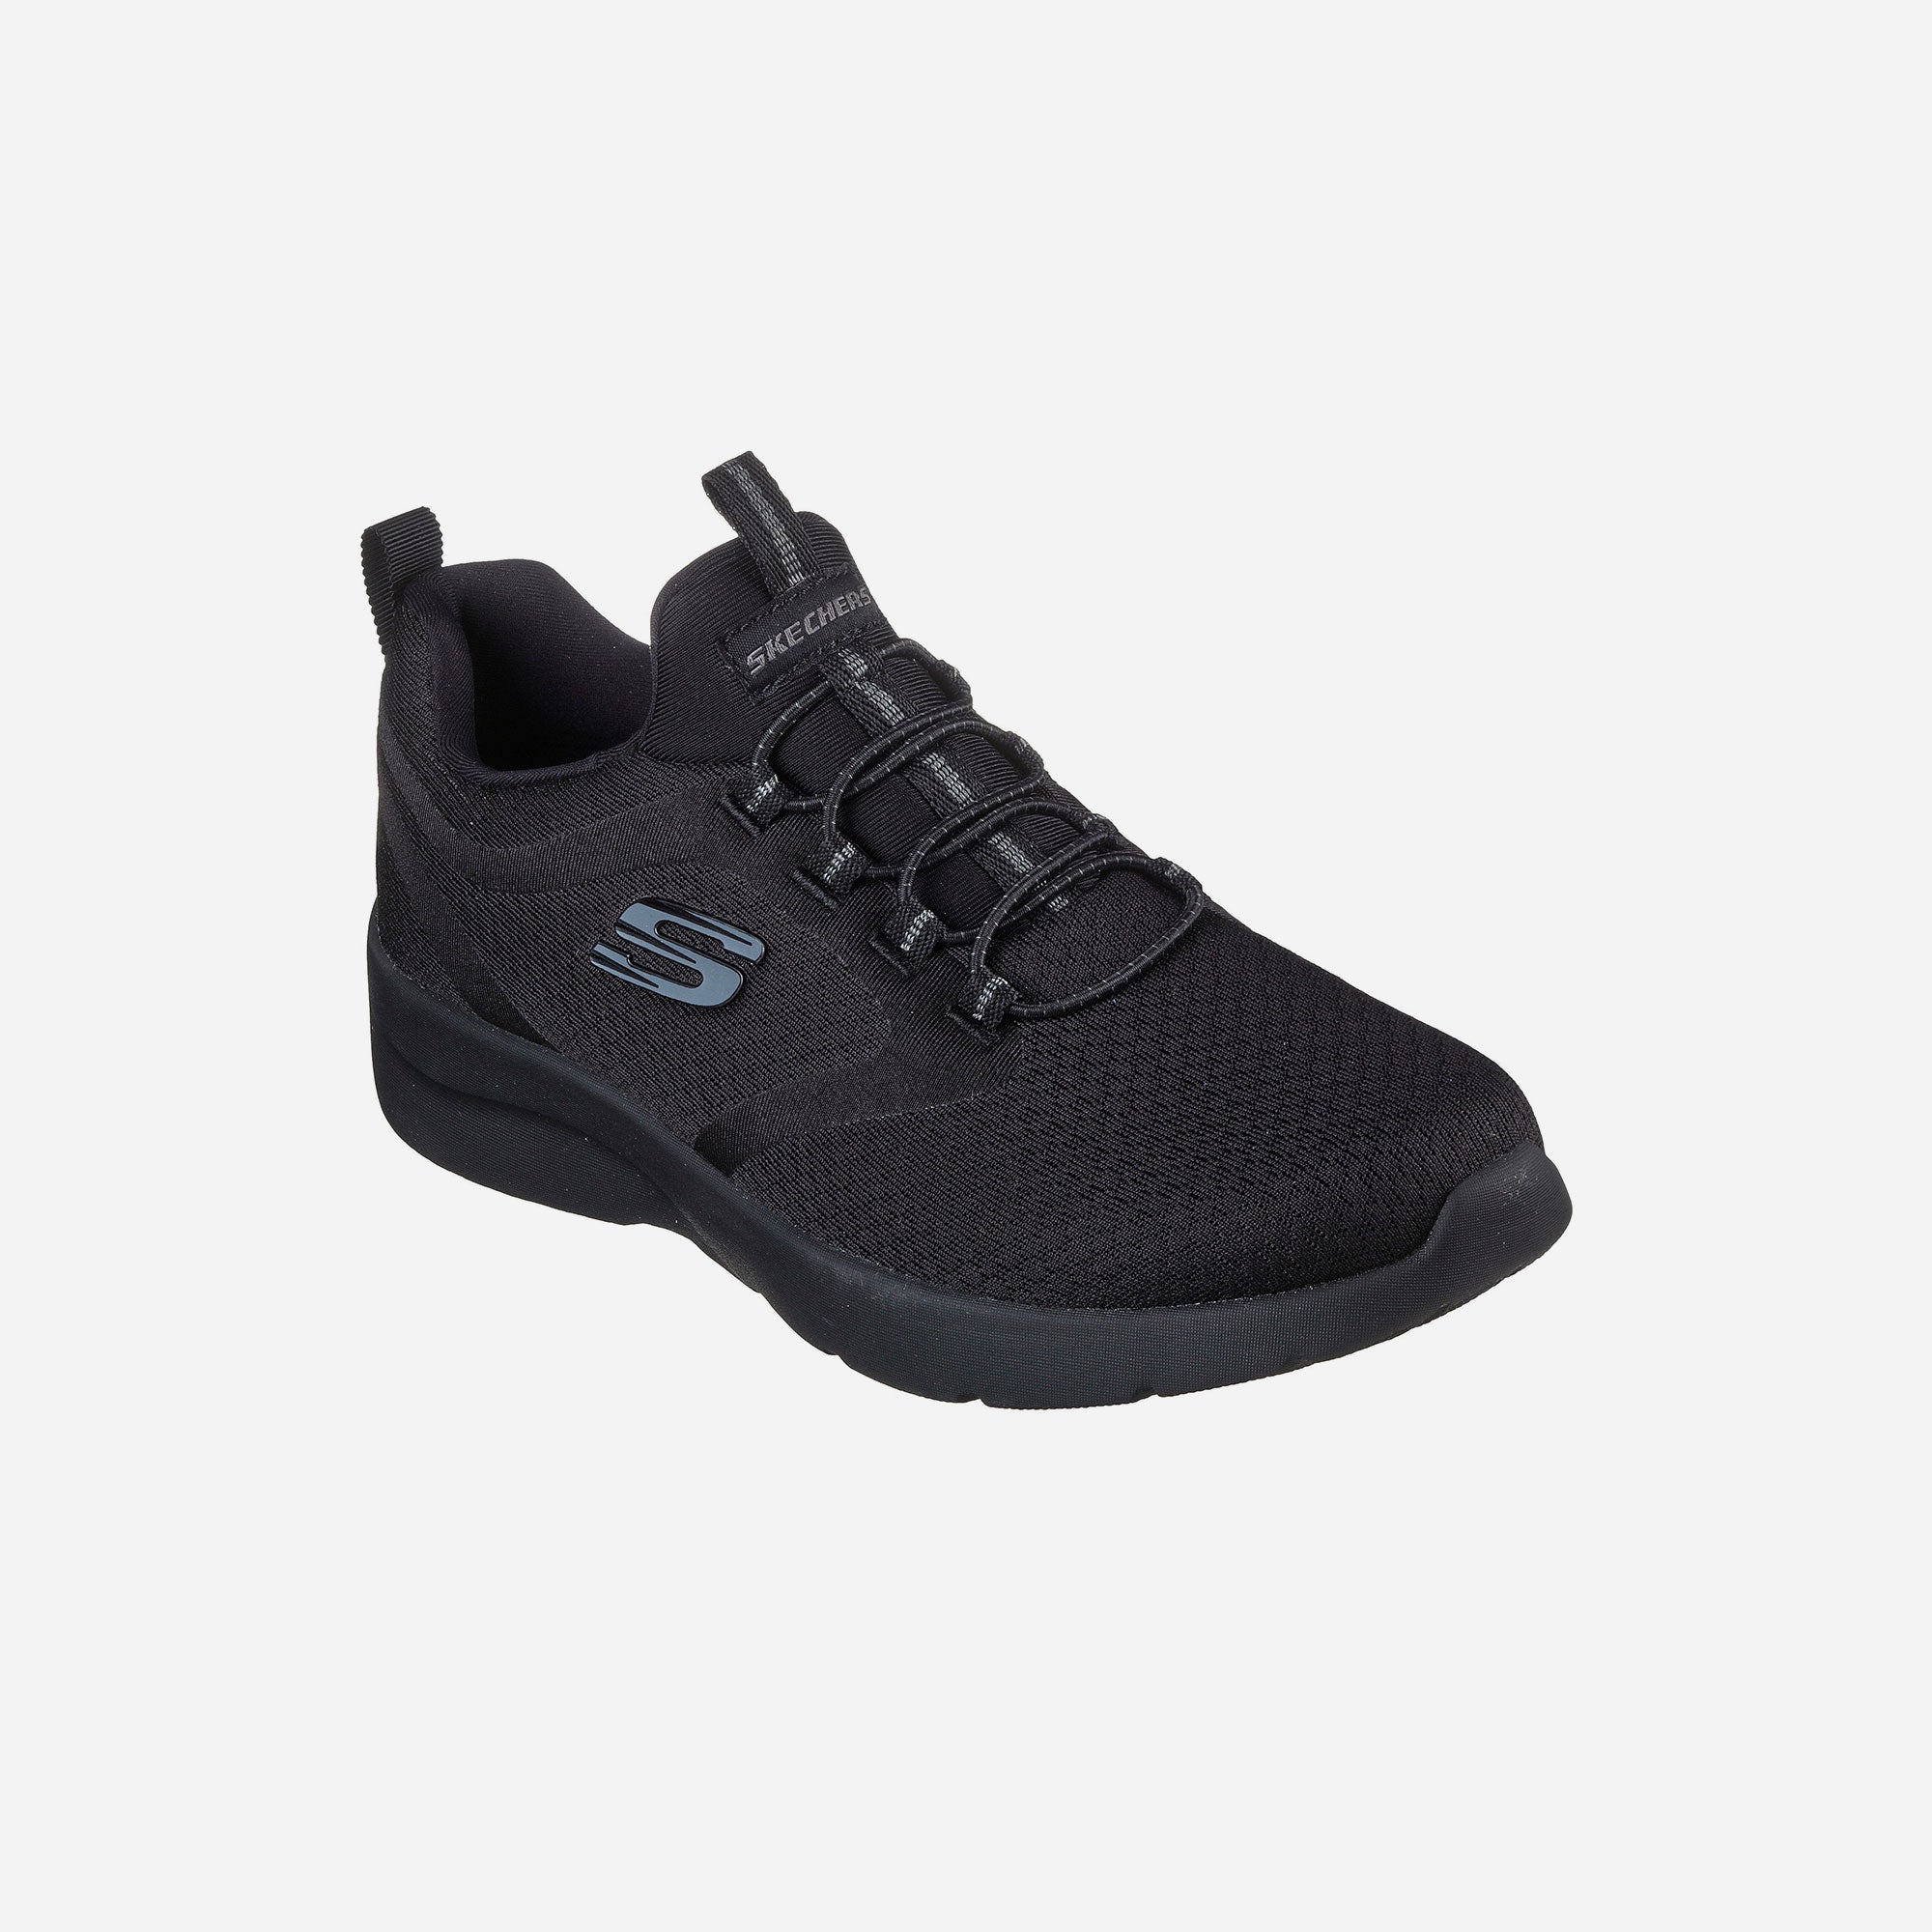 Giày Thể Thao Nữ Skechers Dynamight 2.0 - Supersports Vietnam